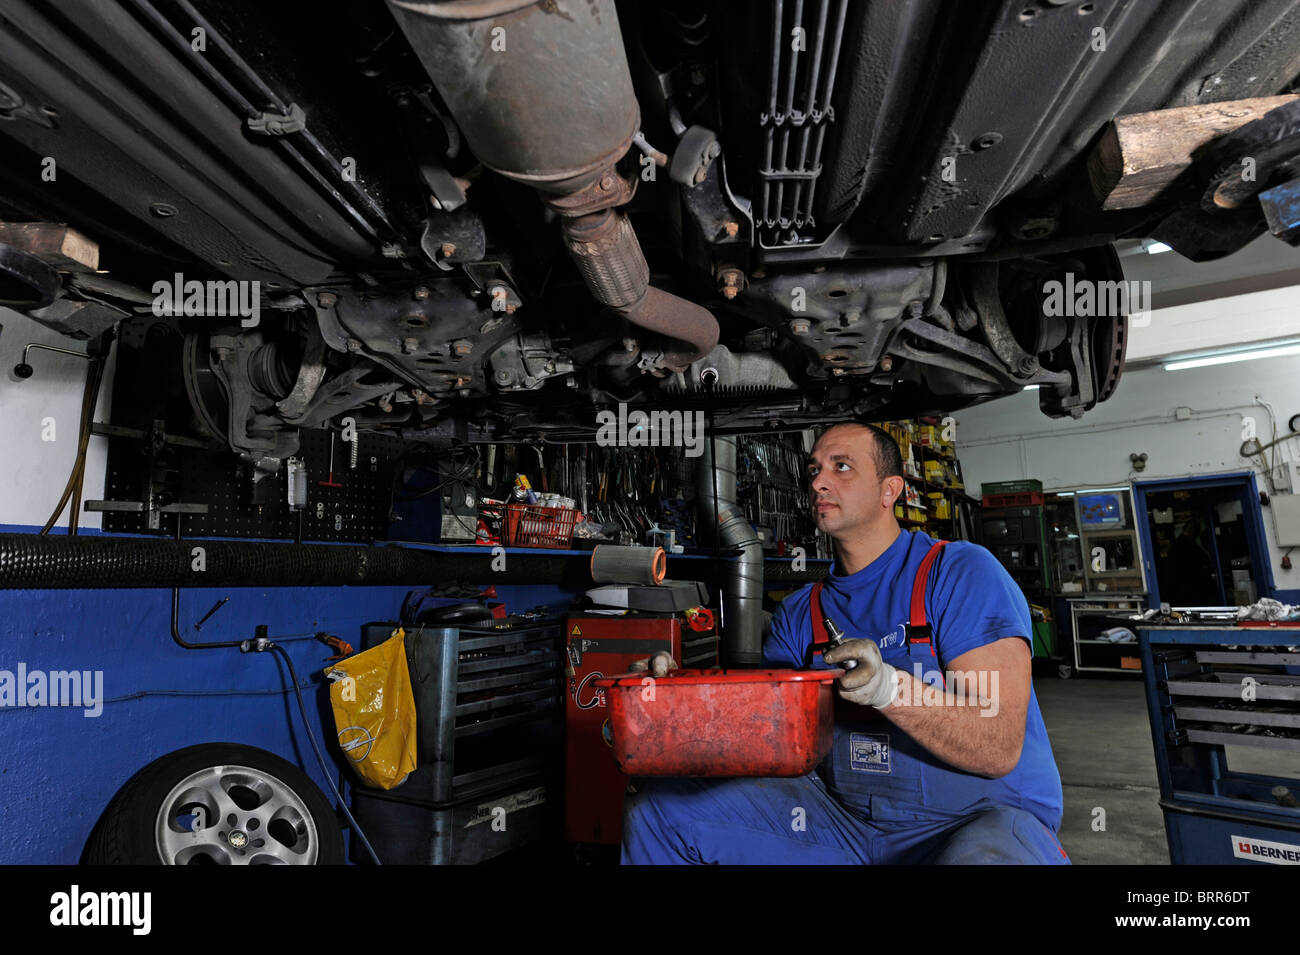 Car workshop with mechanic at work. Stock Photo